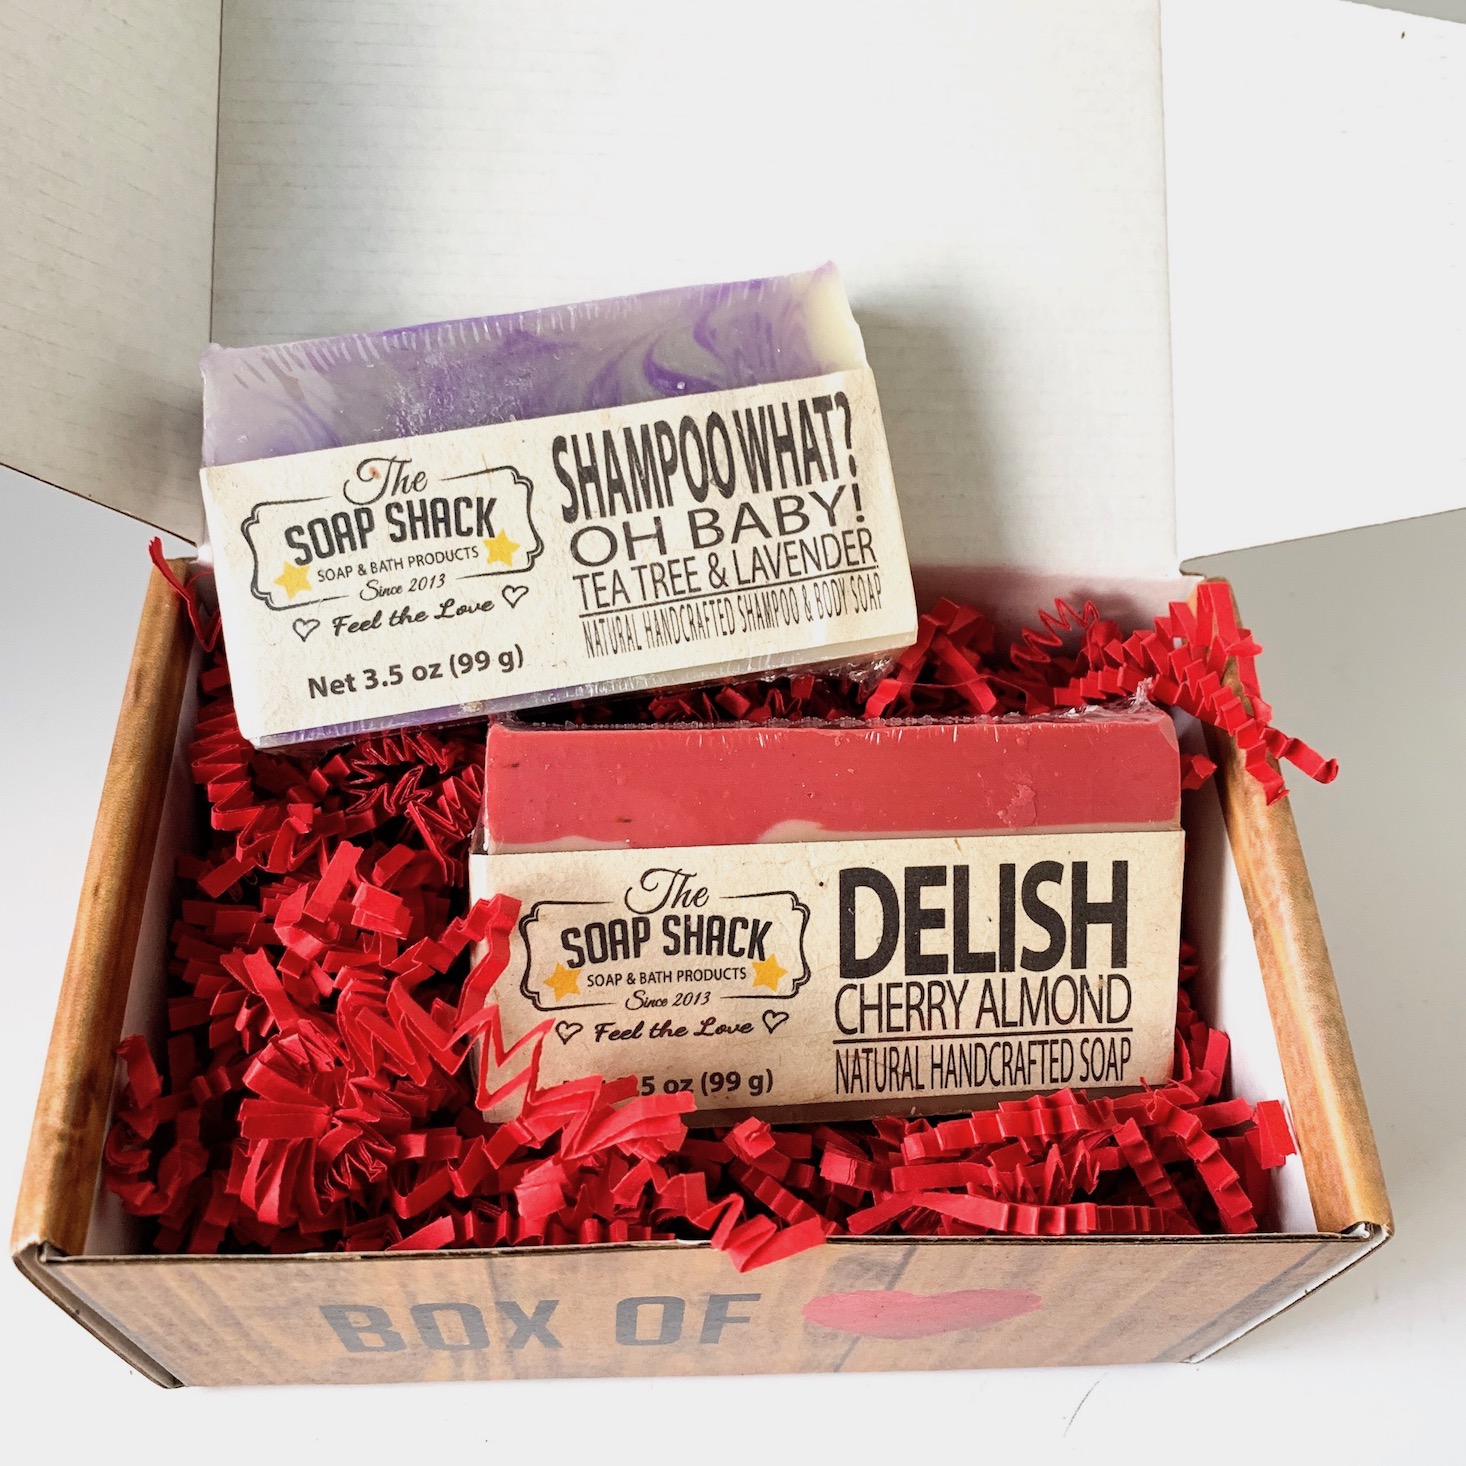 The Soap Shack Soap Club Subscription Review – March 2019